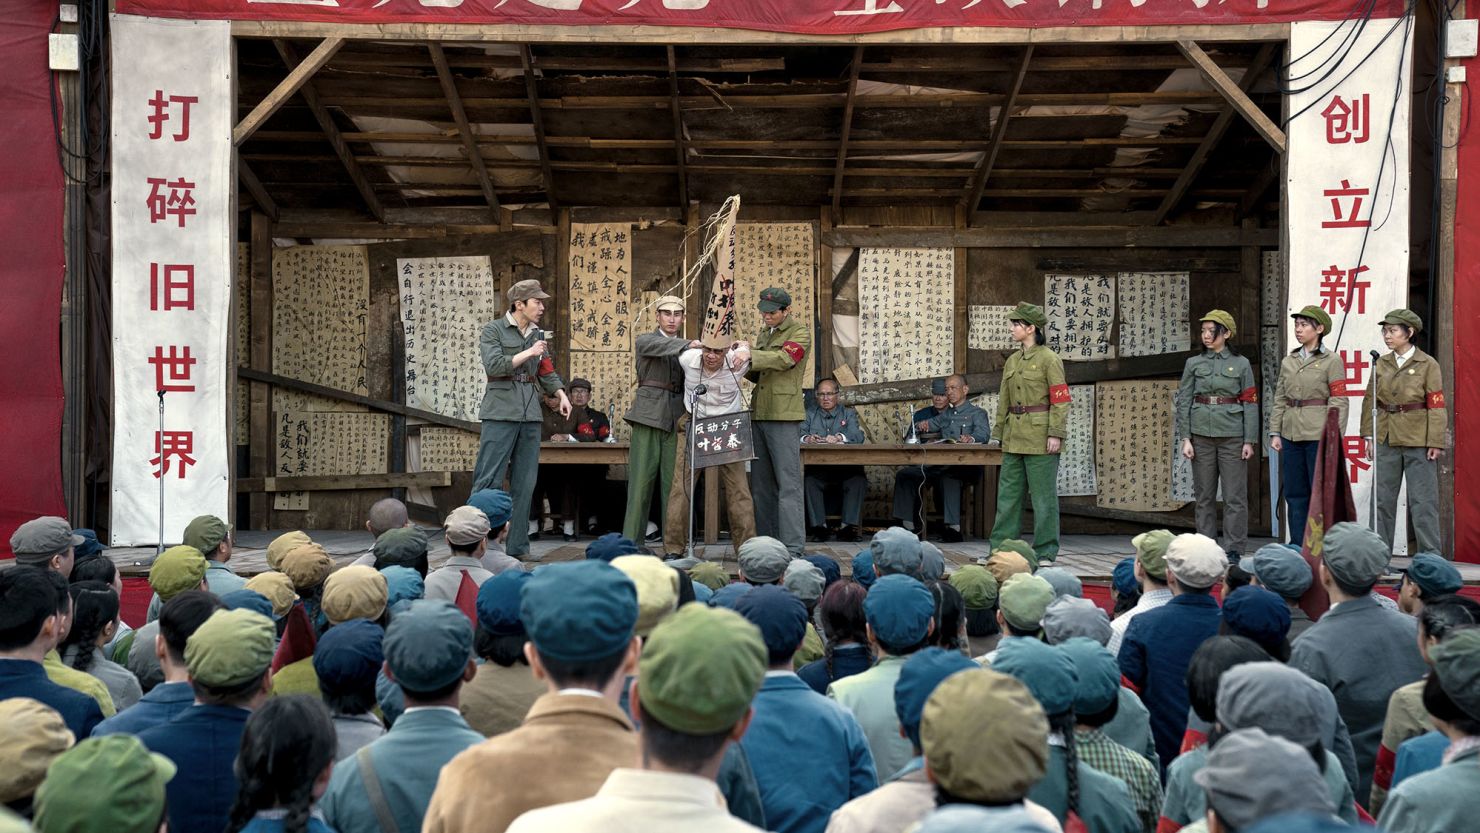 An opening scene of Netflix's "3 Body Problem" depicts a Maoist struggle session during China's Cultural Revolution.